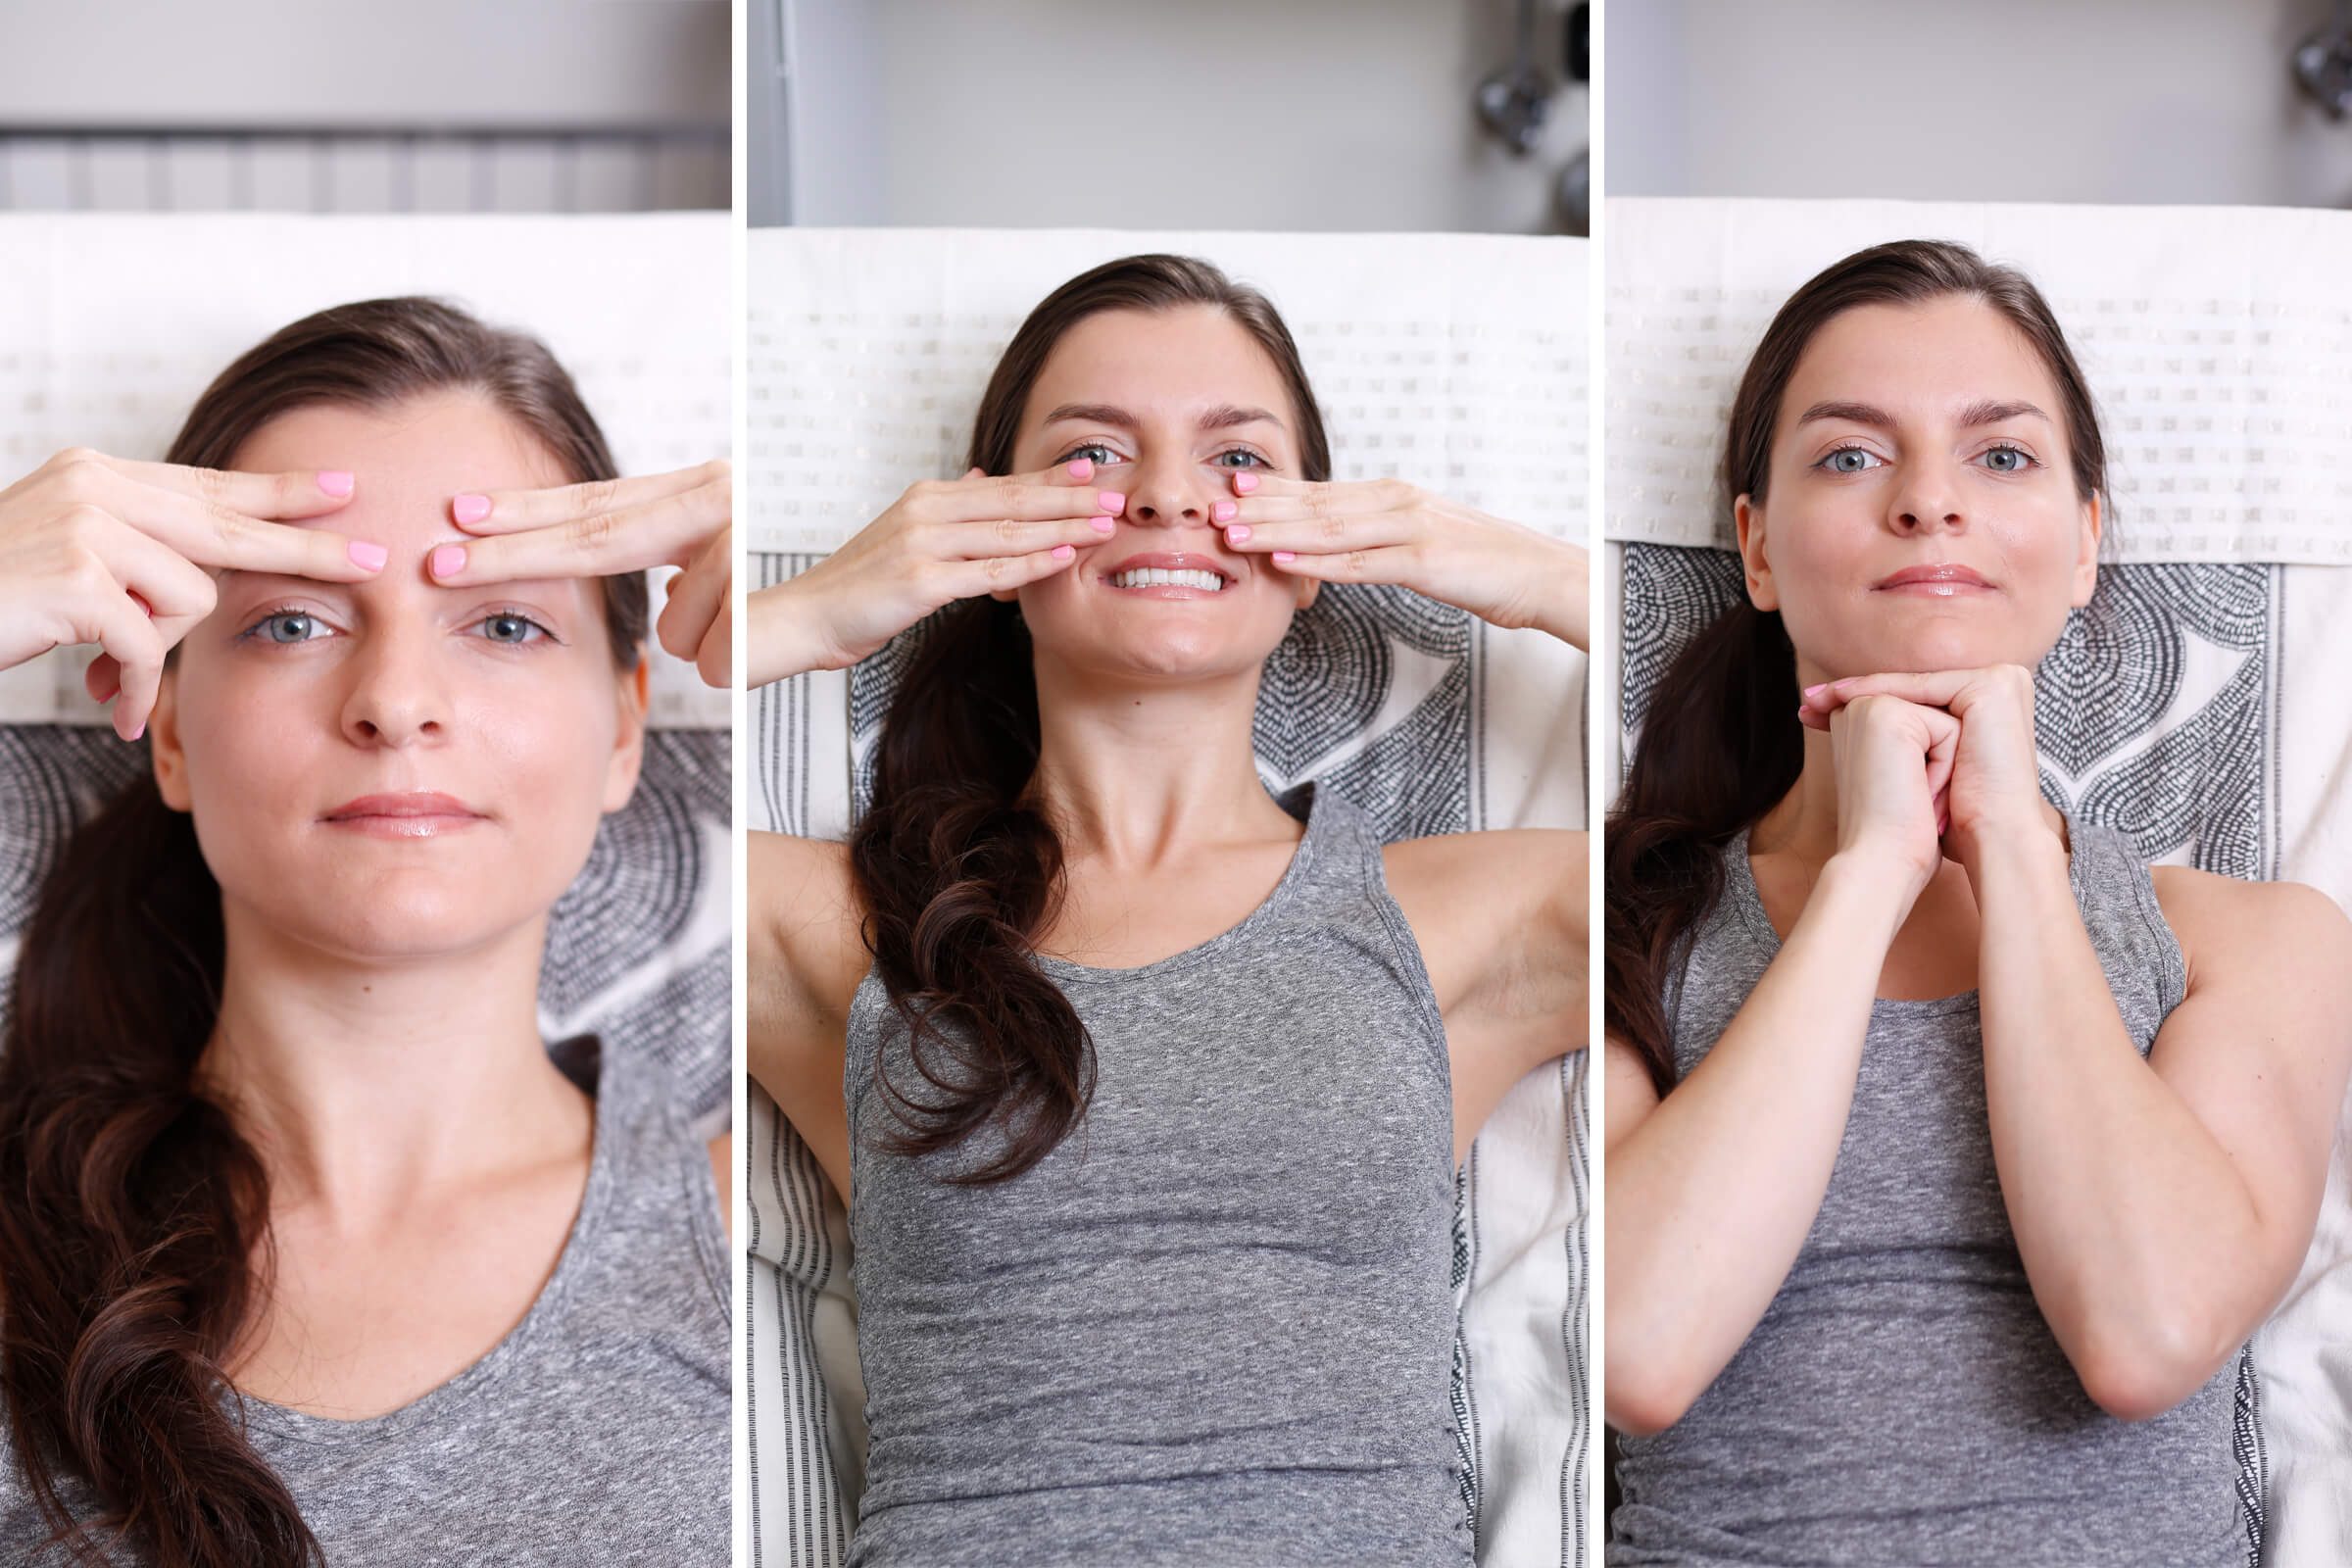 These Science-Approved Facial Exercises May Make You Look Years Younger